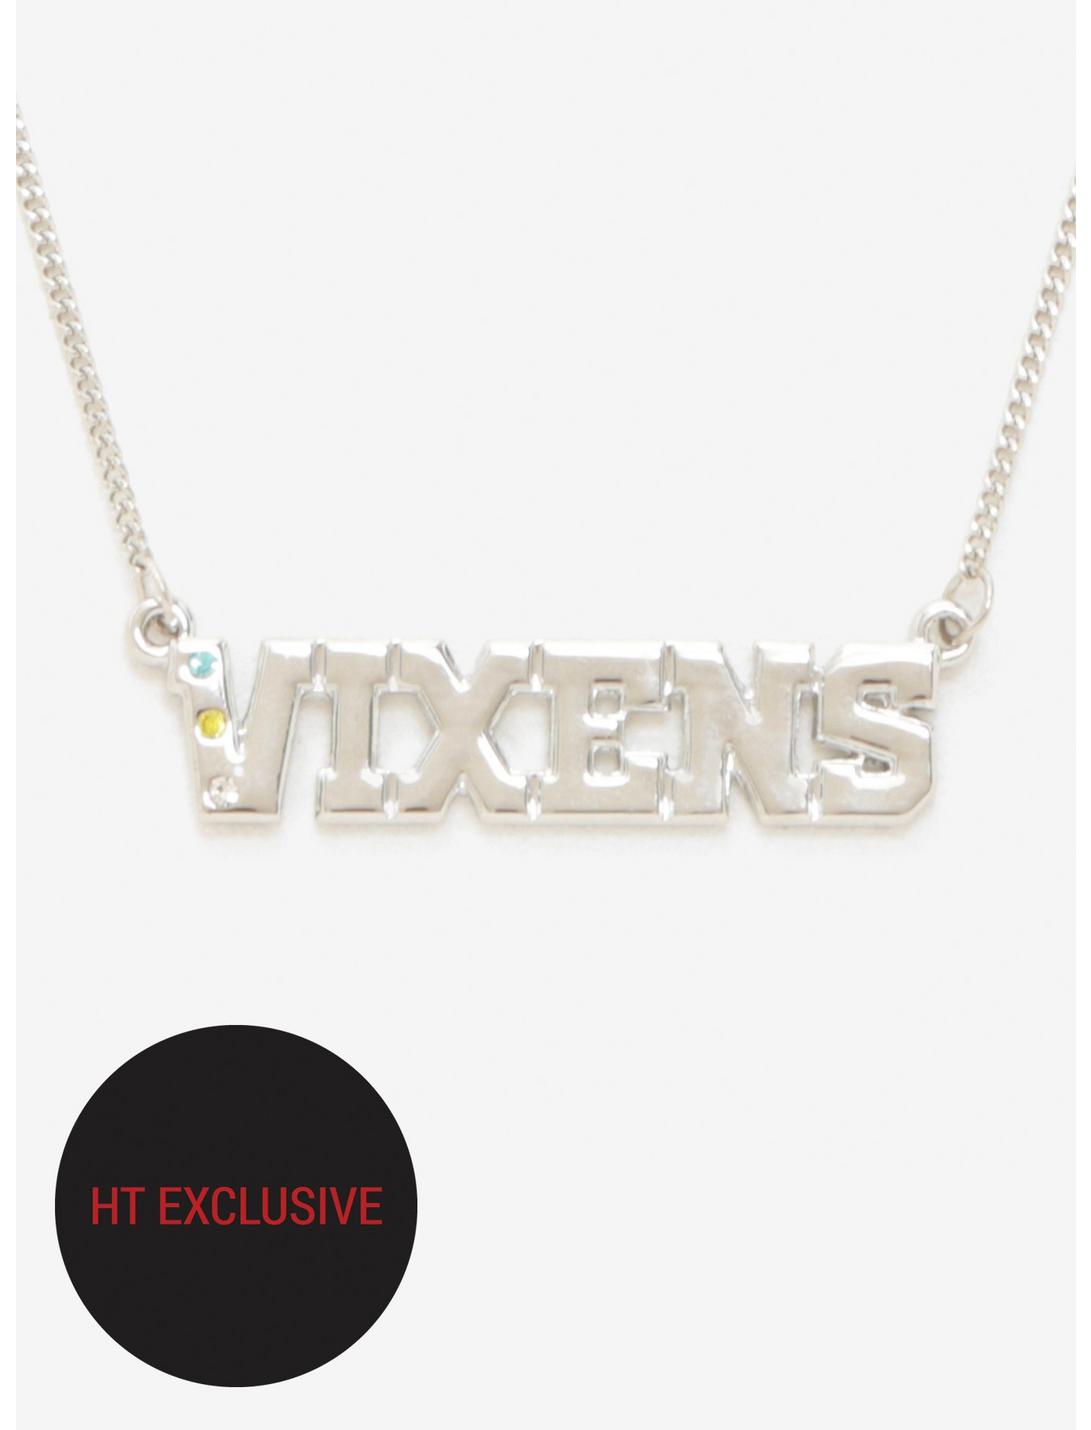 Riverdale Vixens Nameplate Necklace Hot Topic Exclusive, , hi-res